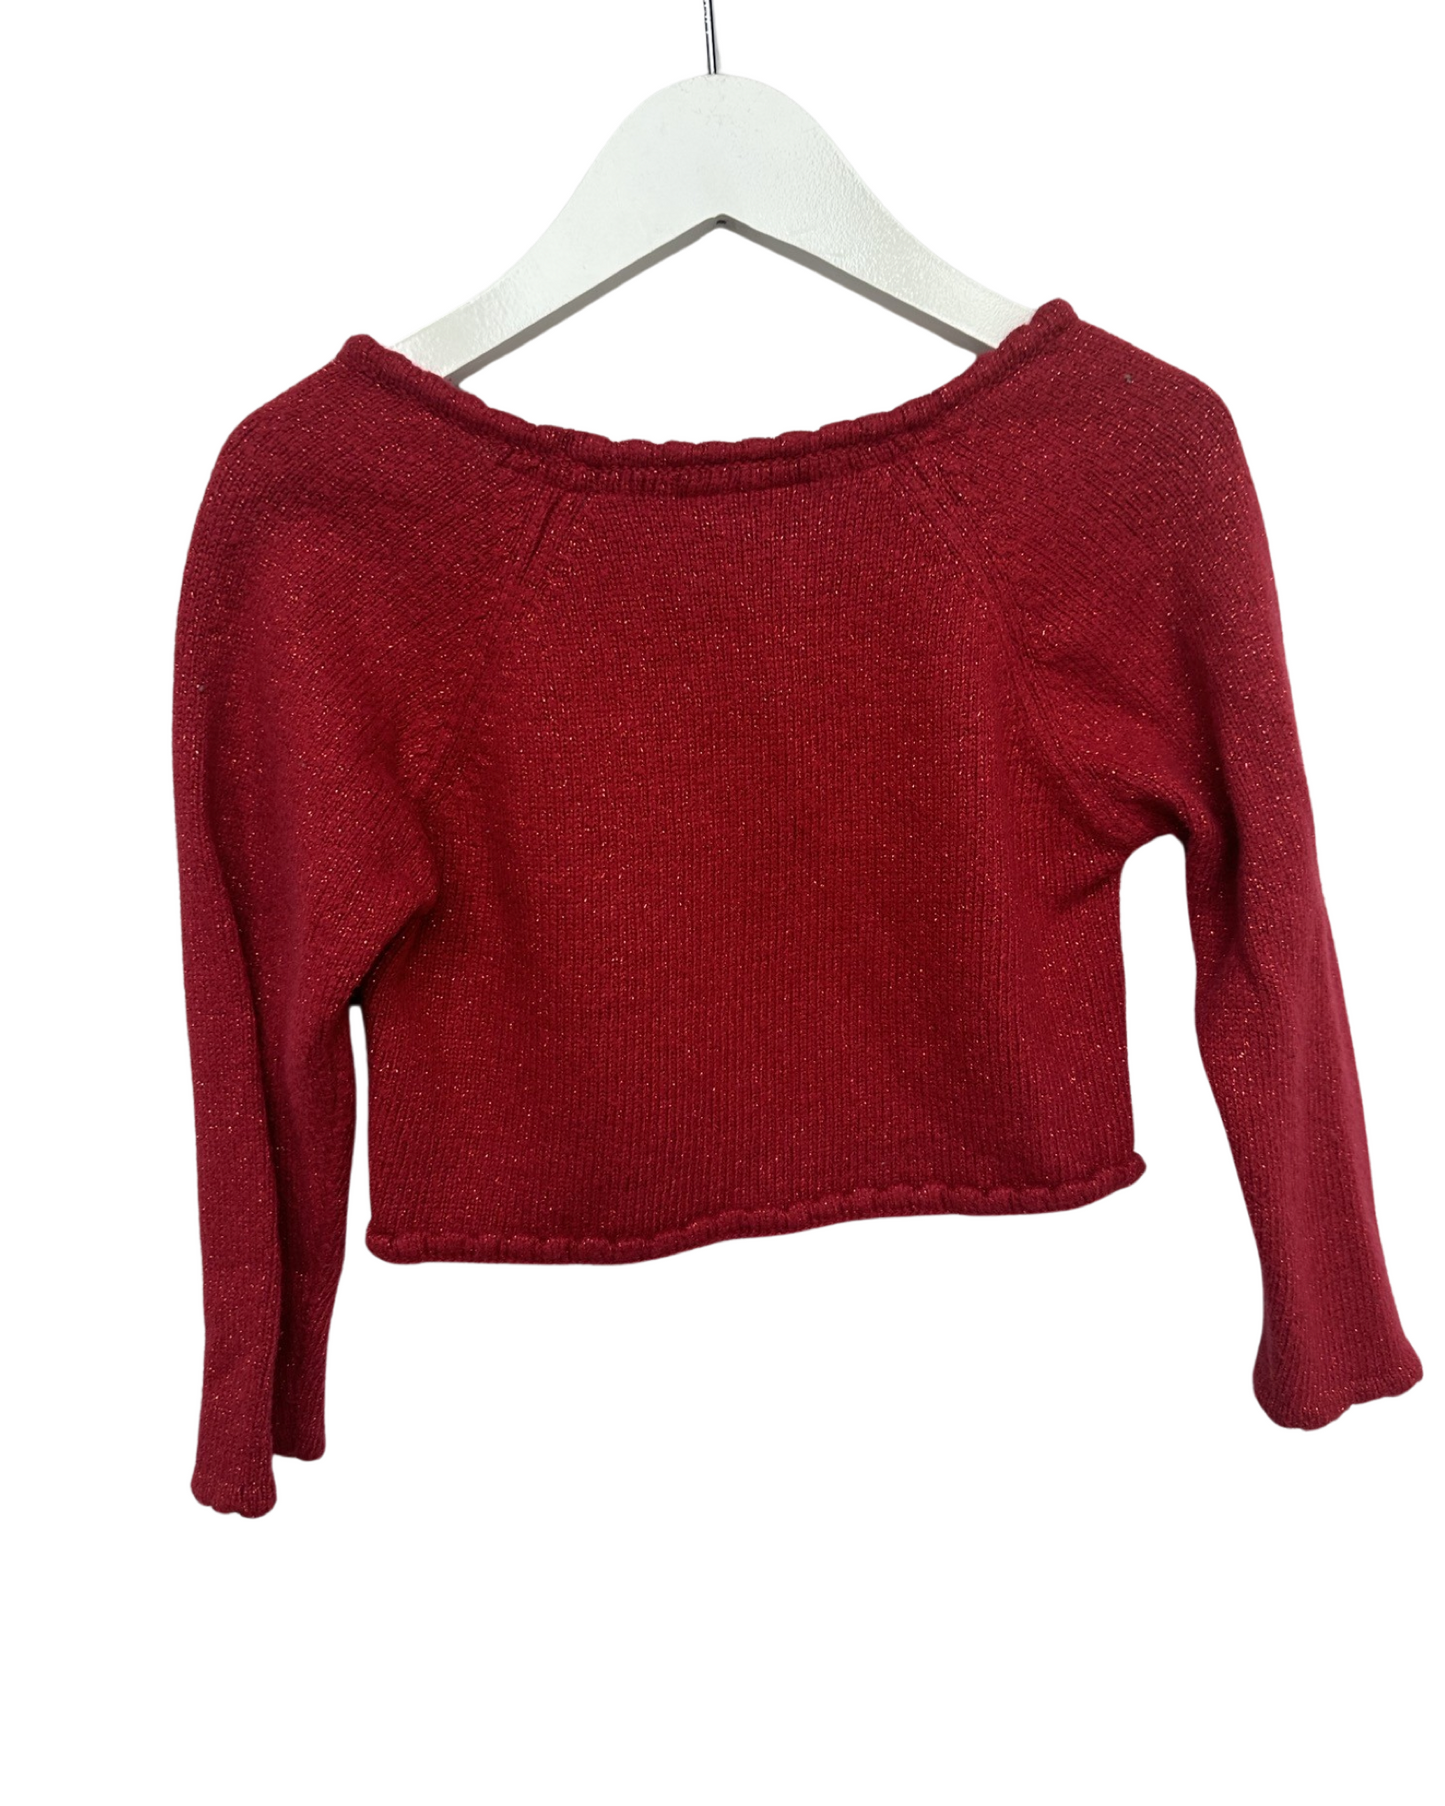 Next red glitter cropped cardigan (size 2-3yrs)